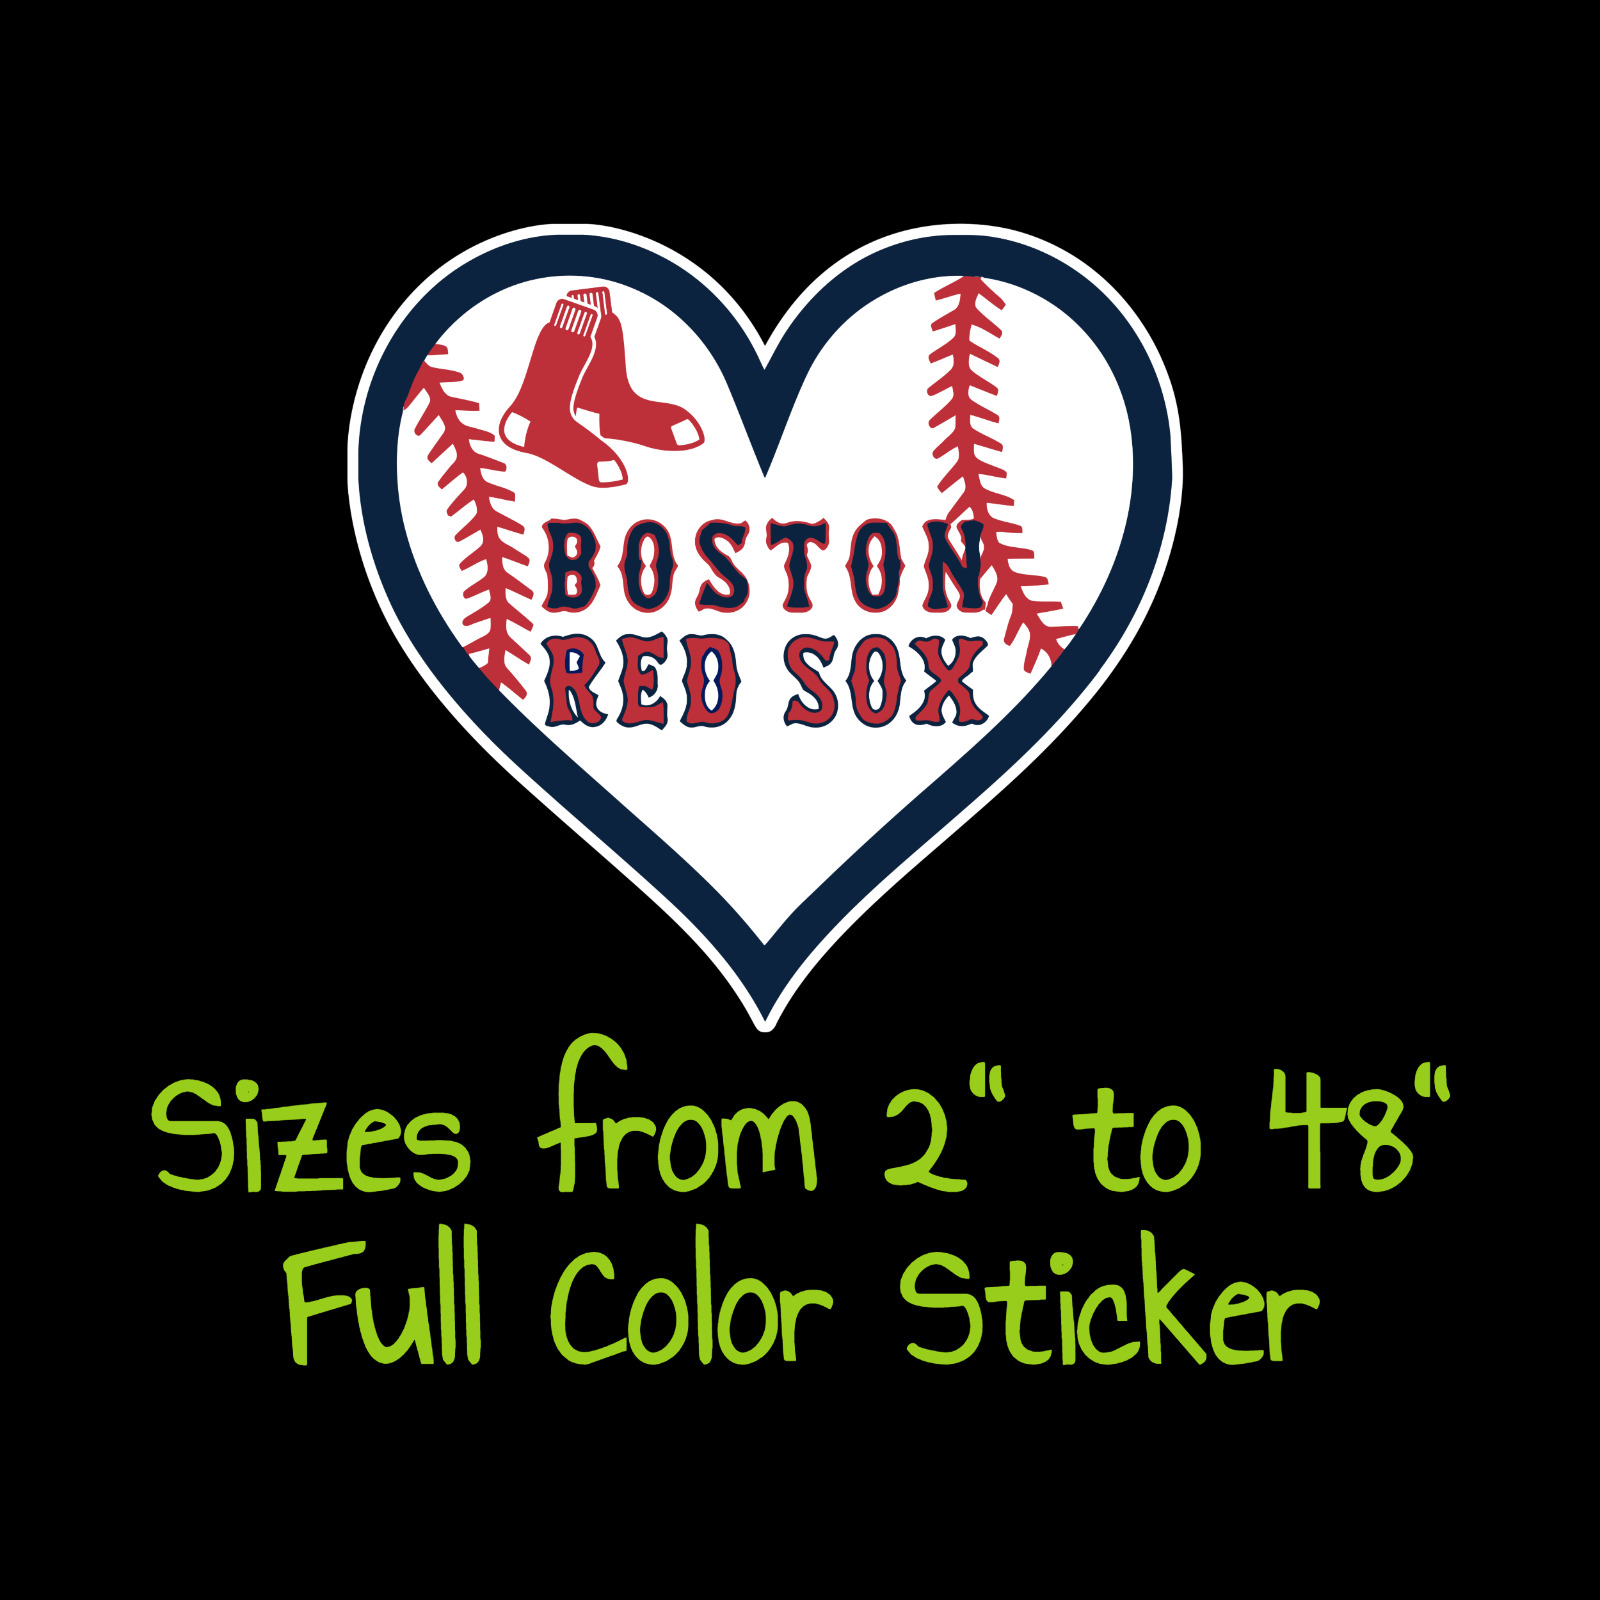 Boston Red Sox Full Color Vinyl Decal | Hydroflask decal | Cornhole decal 8